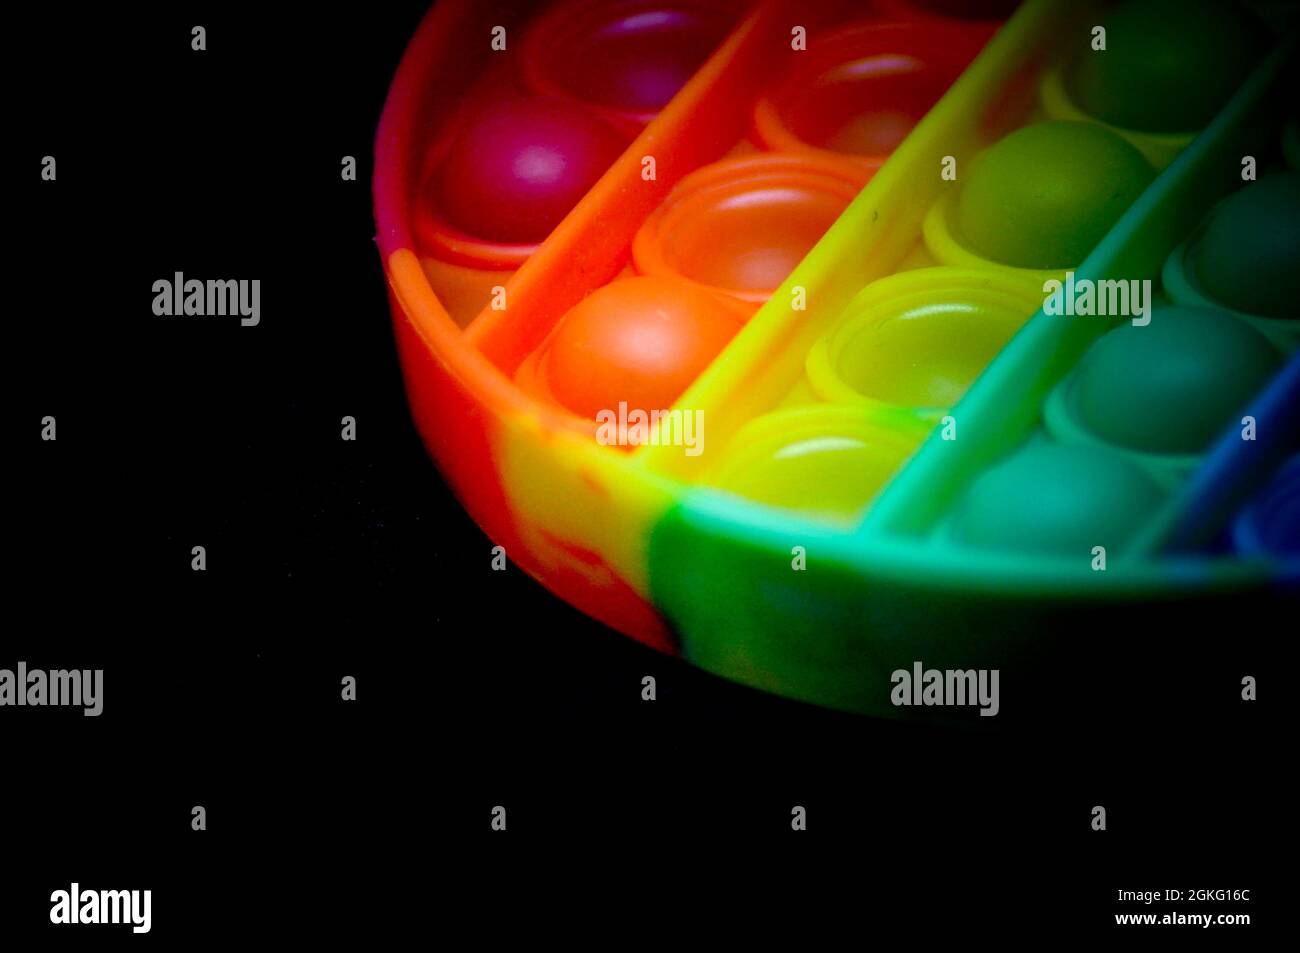 Rainbow coloured fidget popper toy to help relieve anxiety or sensory difficulties in children. Image is set against a black background Stock Photo